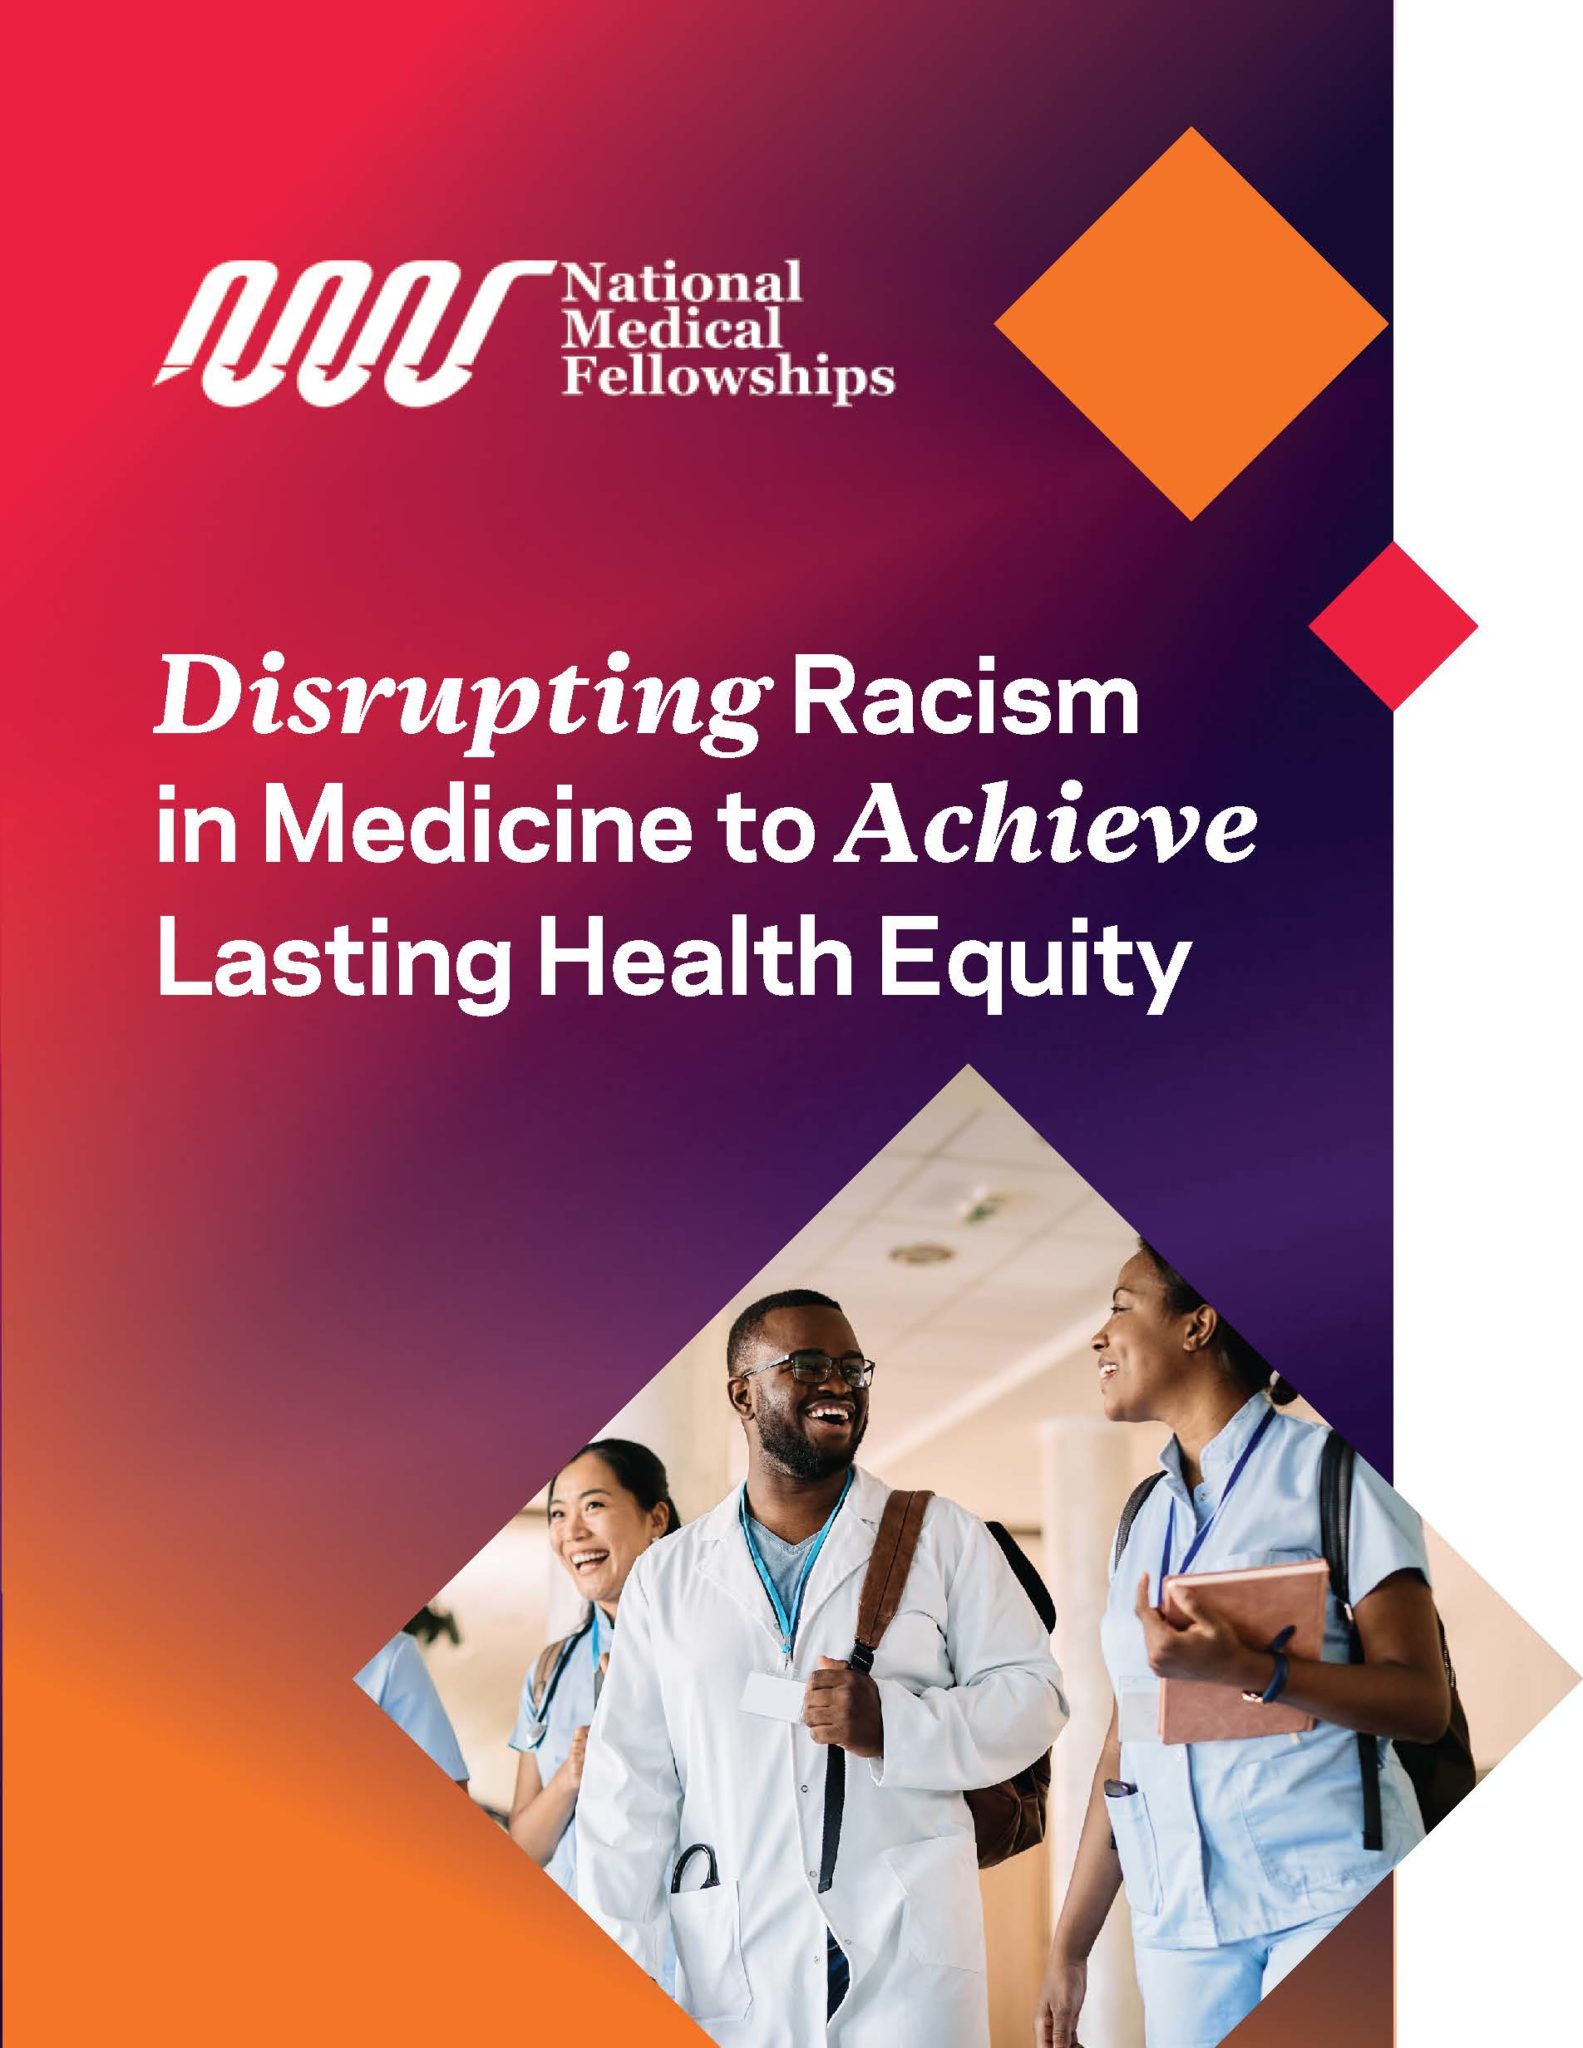 Publication Cover reading National Medical Fellowships: Disrupting Racism in Medicine to Achieve Lasting Health Equity. Also has a photo of doctors walking and tallking.